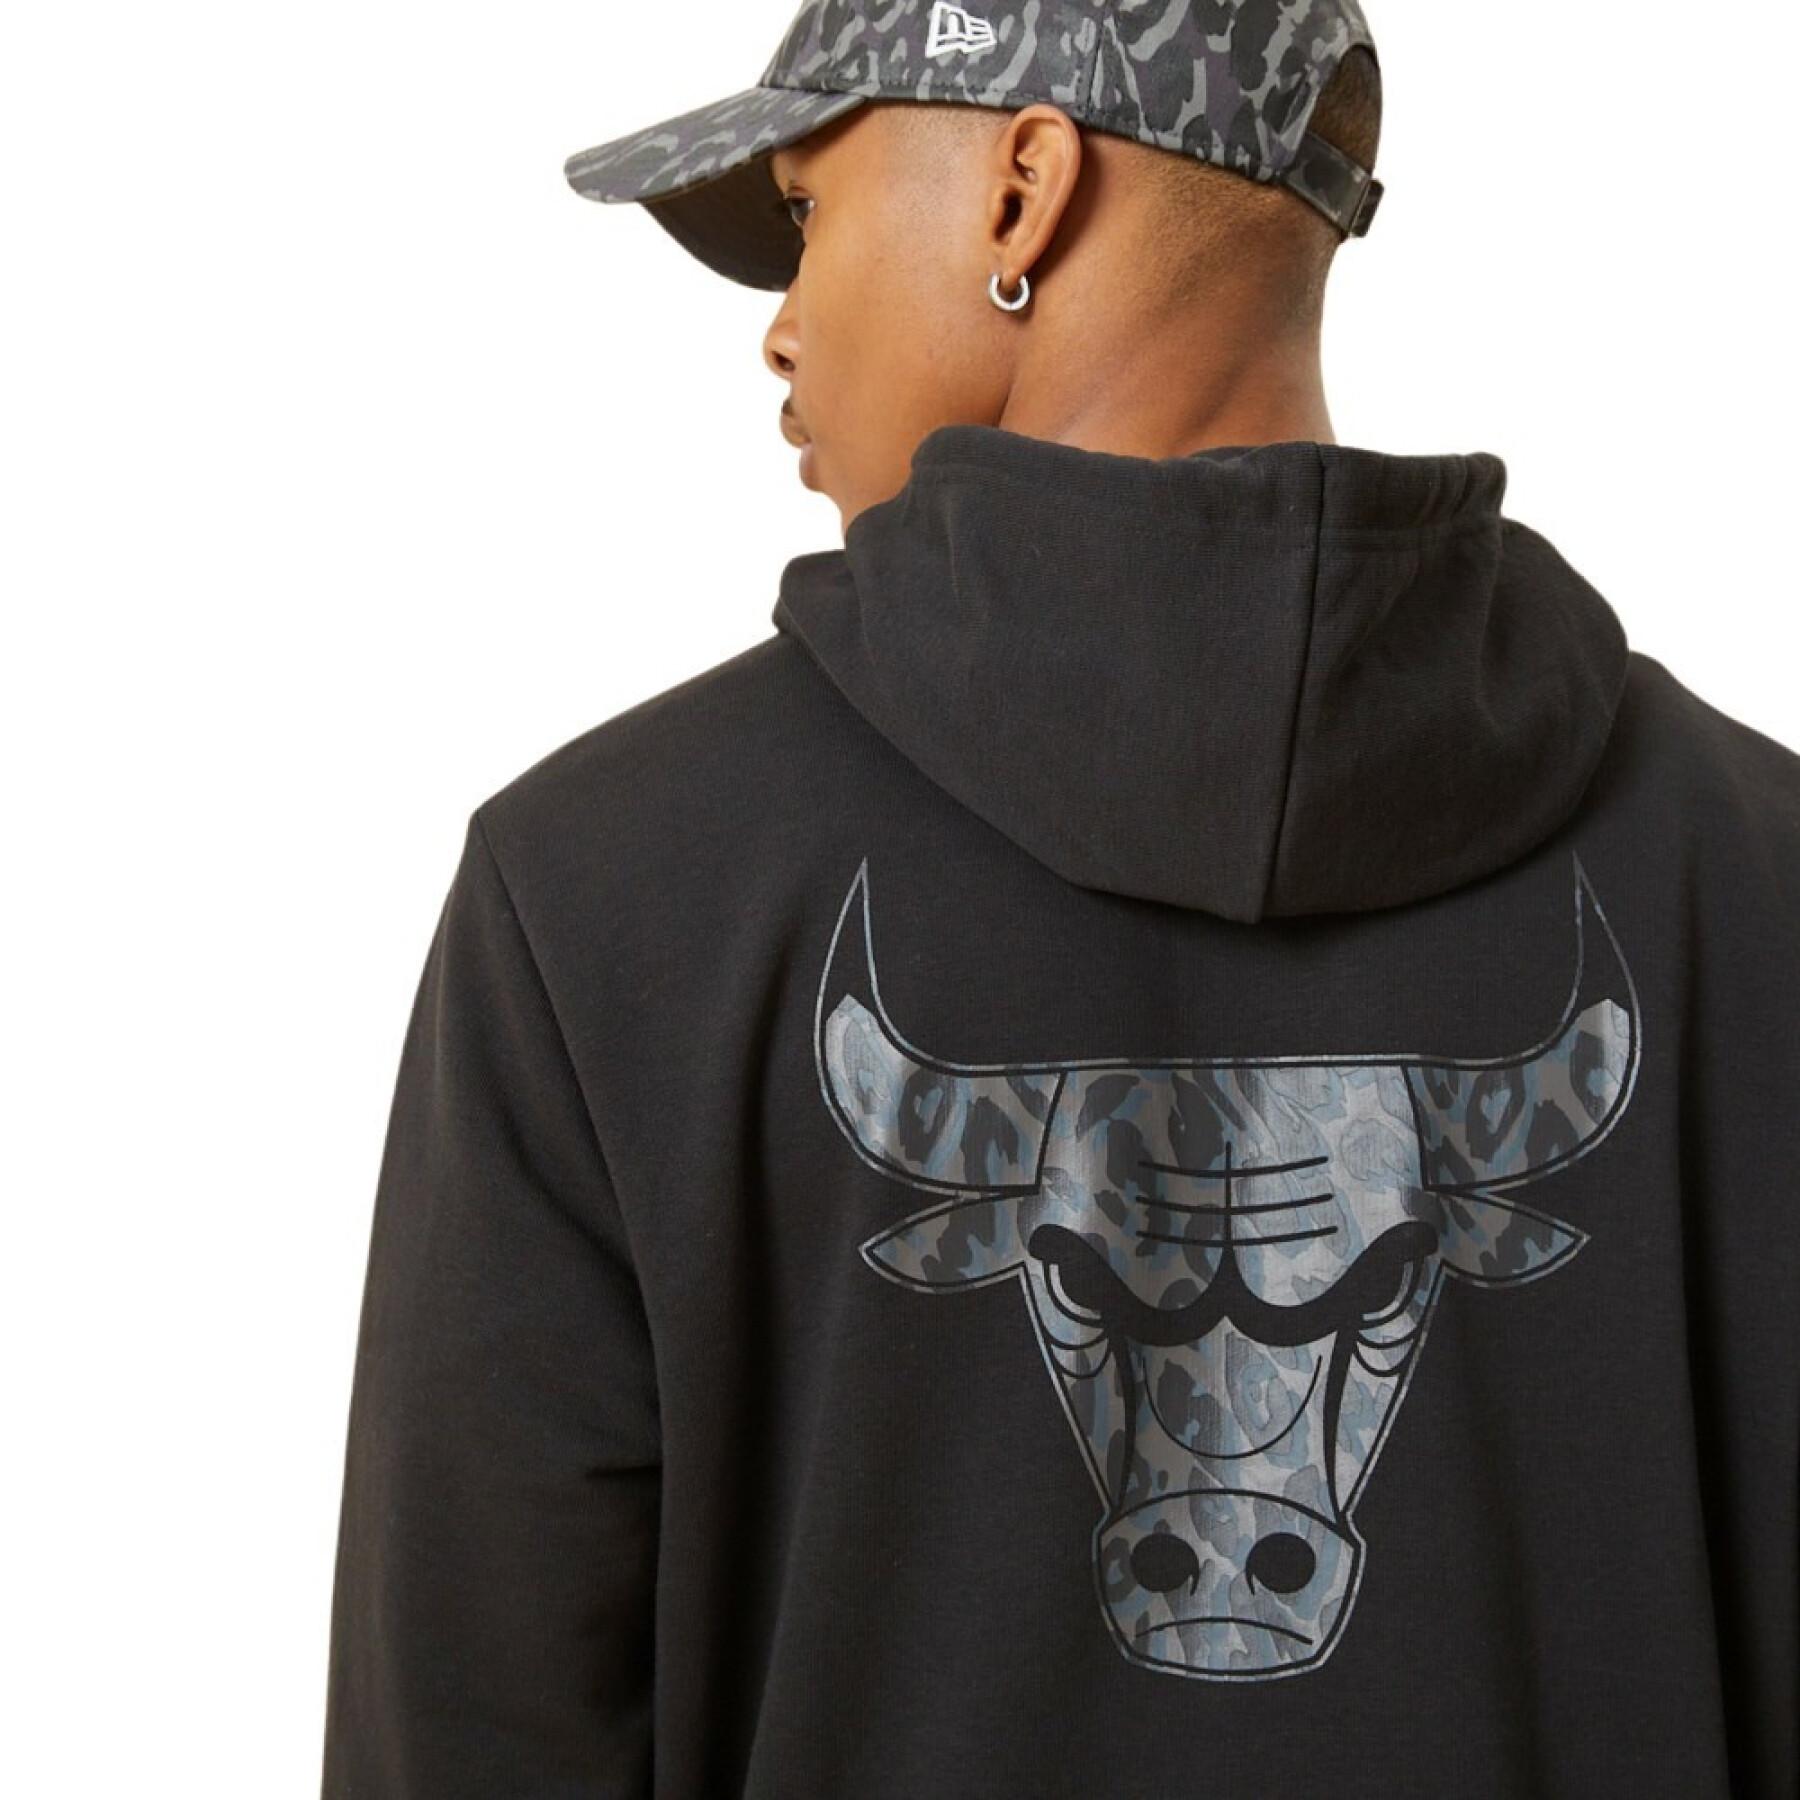 Hoodie Chicago Bulls In Fill